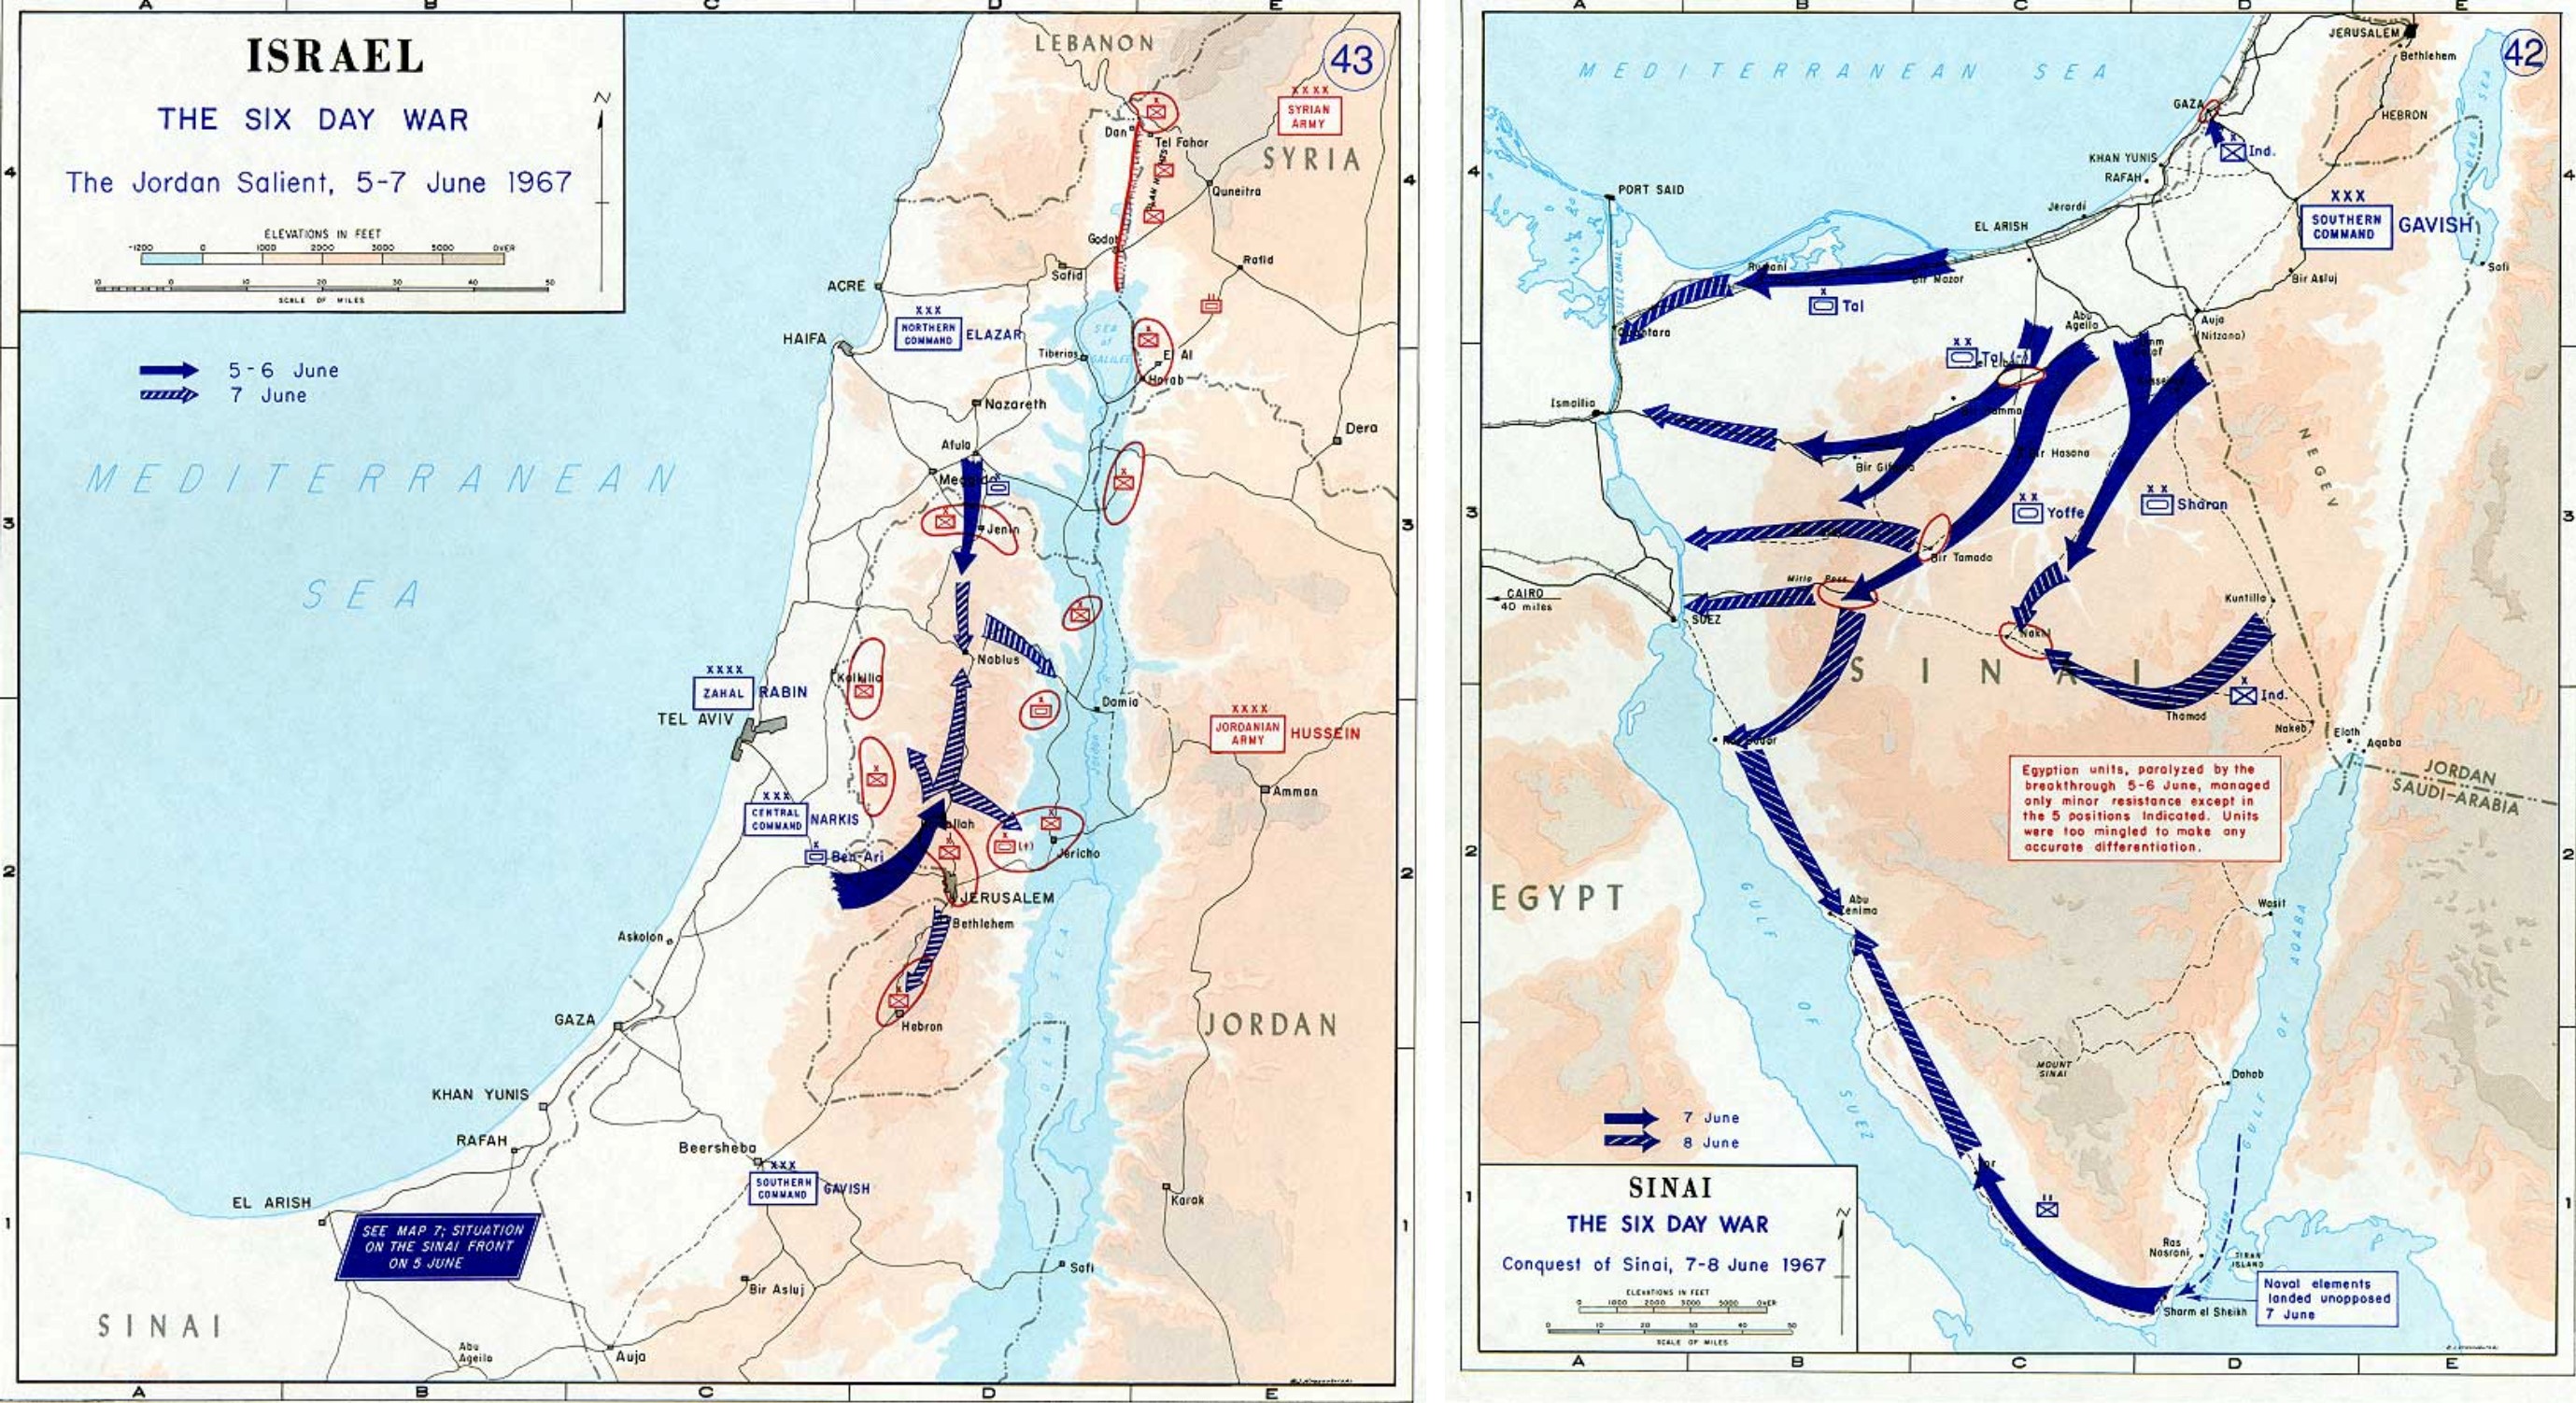 On the left, a map of Israeli movement into the Jordan salient. On the right, a map of Israeli movement into the Sinai Peninsula.